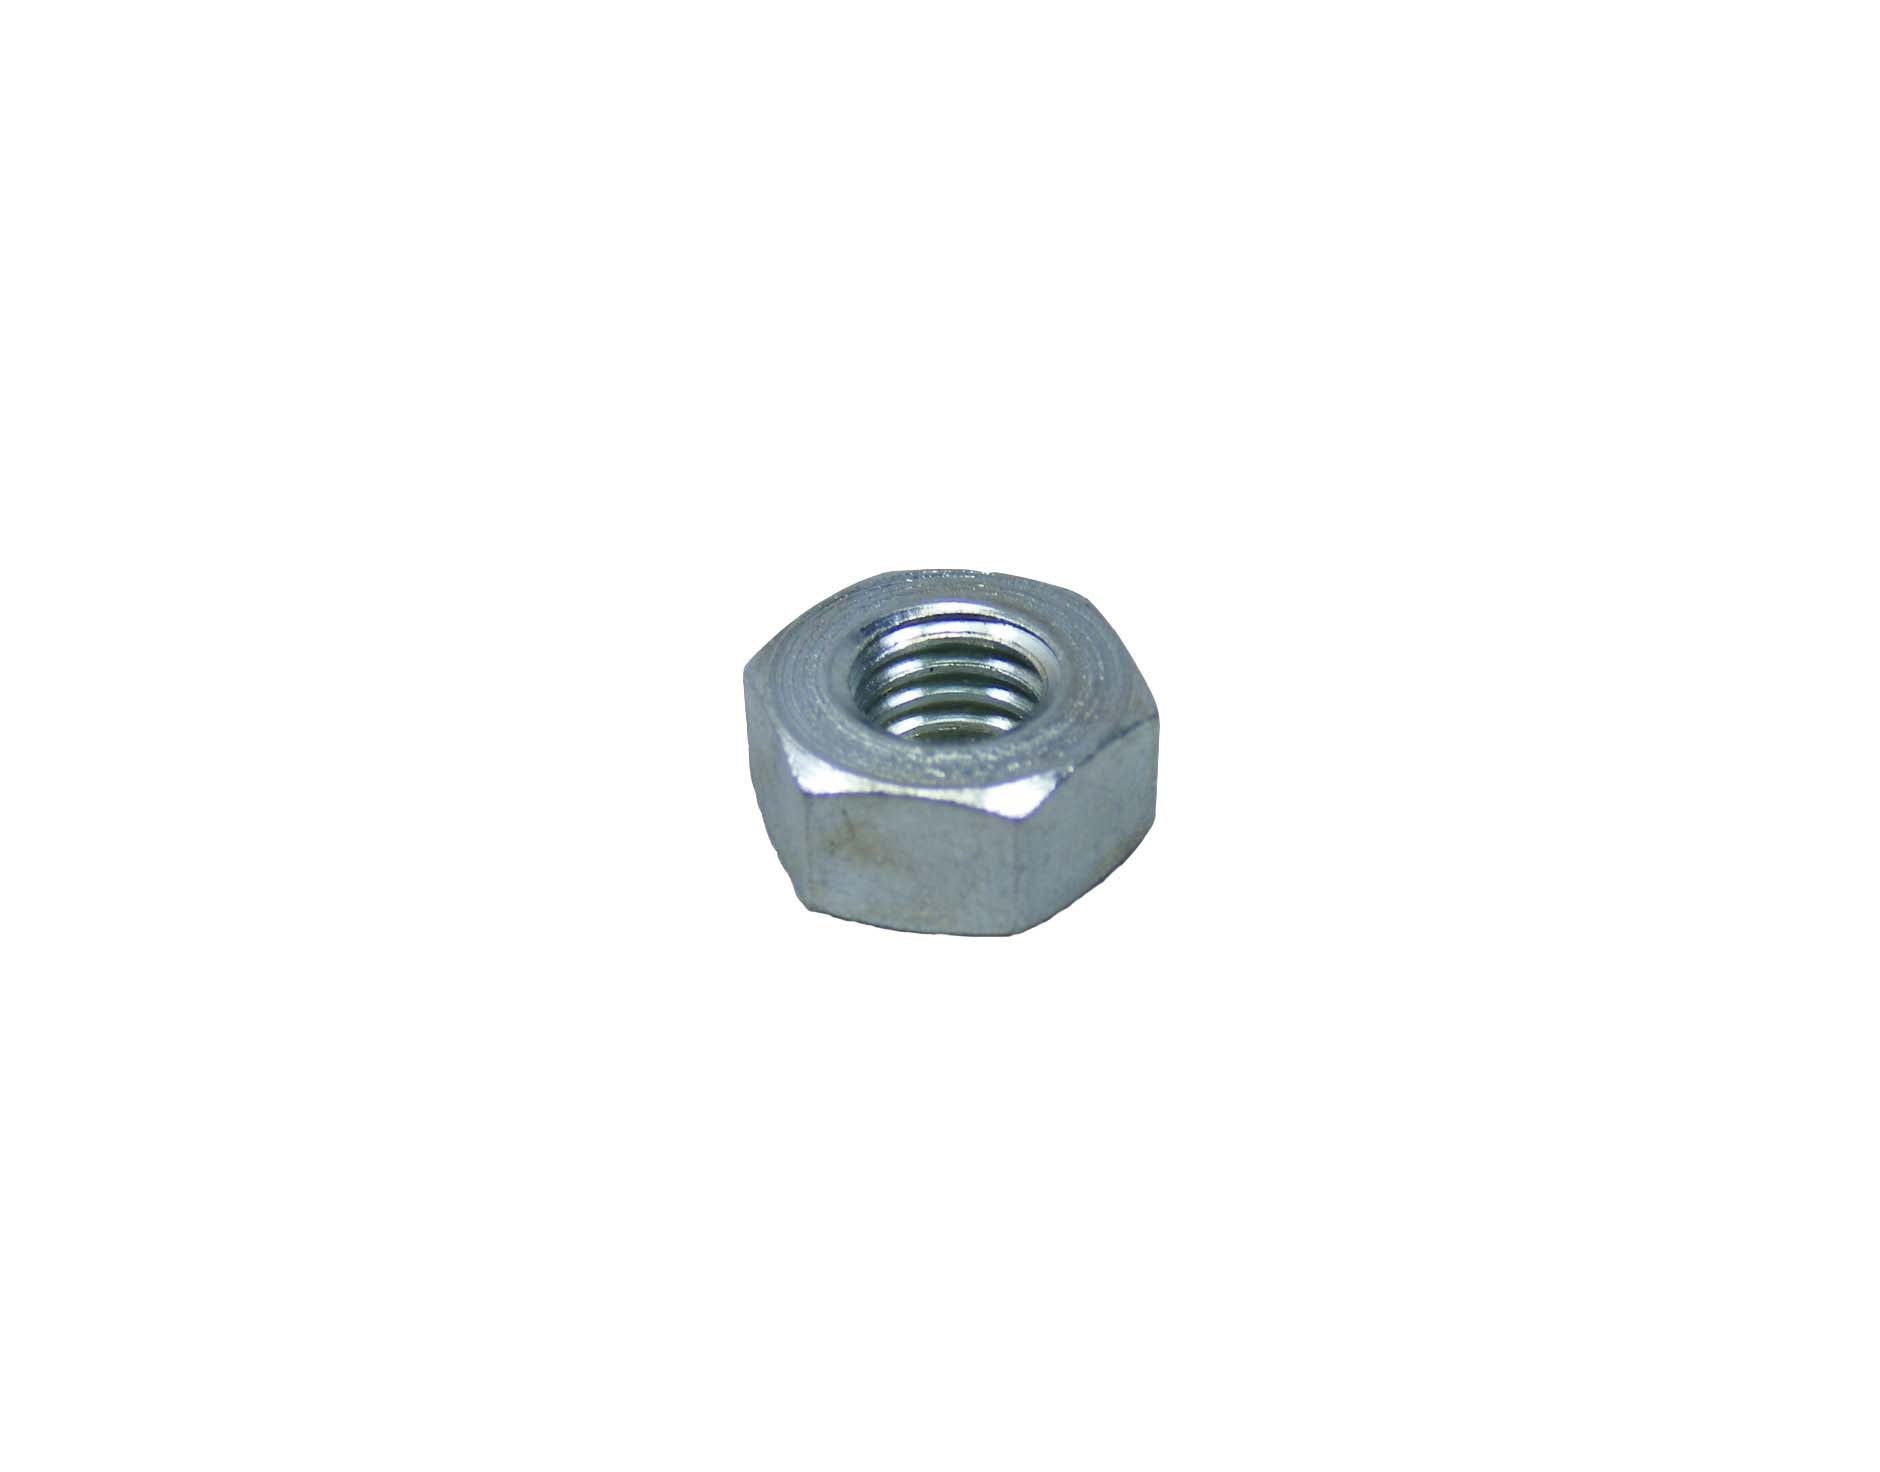 Lindhaus Lhs113 M6 pulley nut 010340009